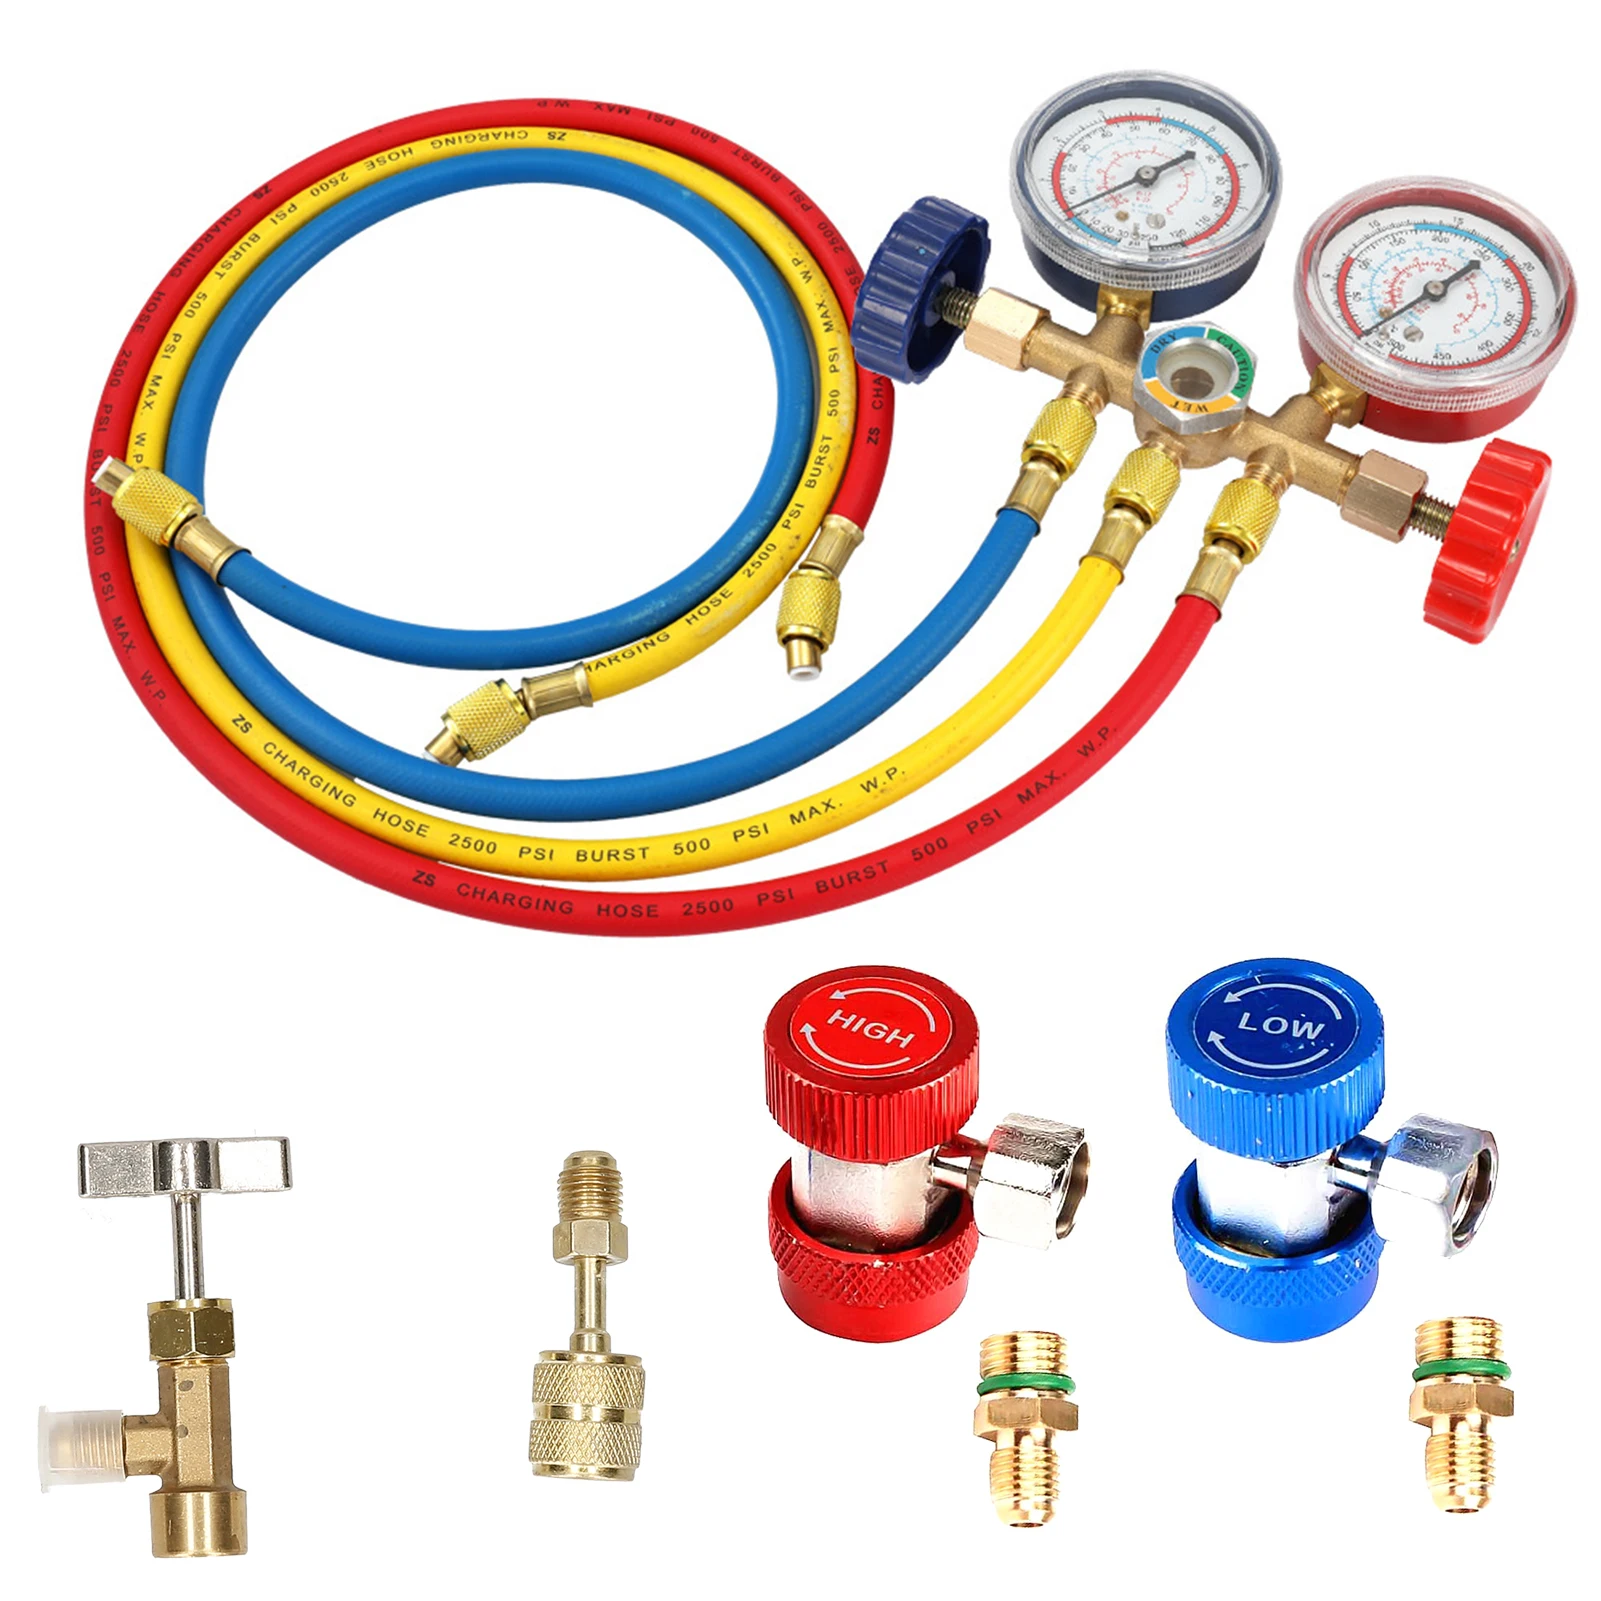 Vislone R134A Refrigeration Gauge A/C Refrigerant Air Conditioning Manifold Gauge Tools Set with Hose and Hook for R12 R22 R404A R134A 